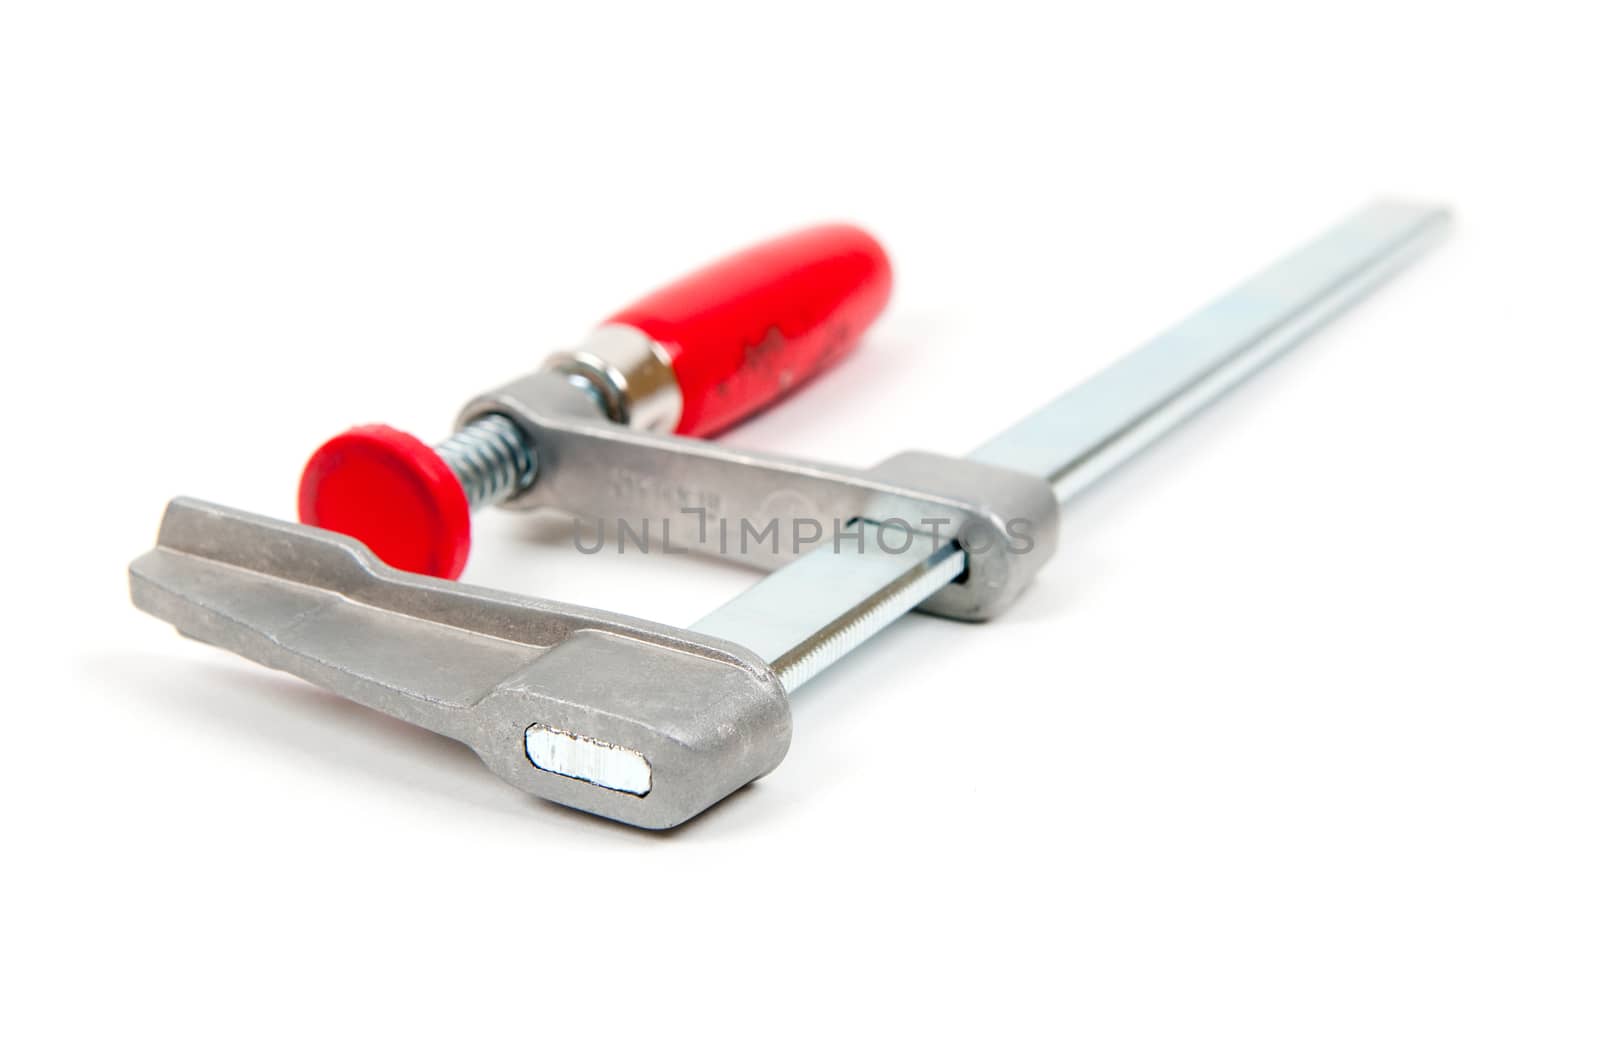 Metal vice with red handle on white background